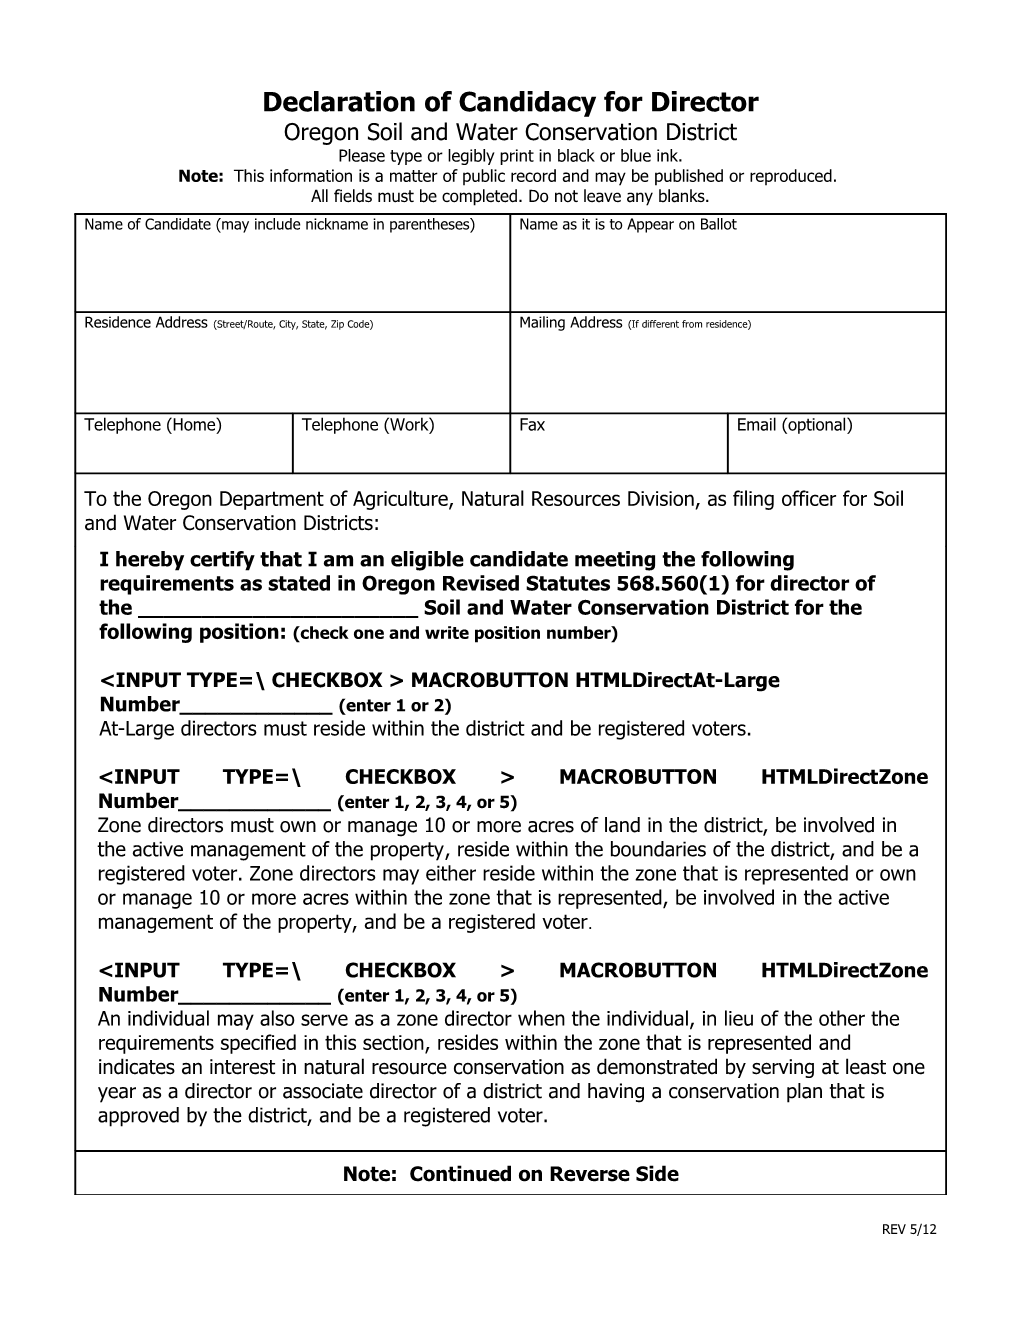 SWCD Director Declaration of Candidacy Form (2012)